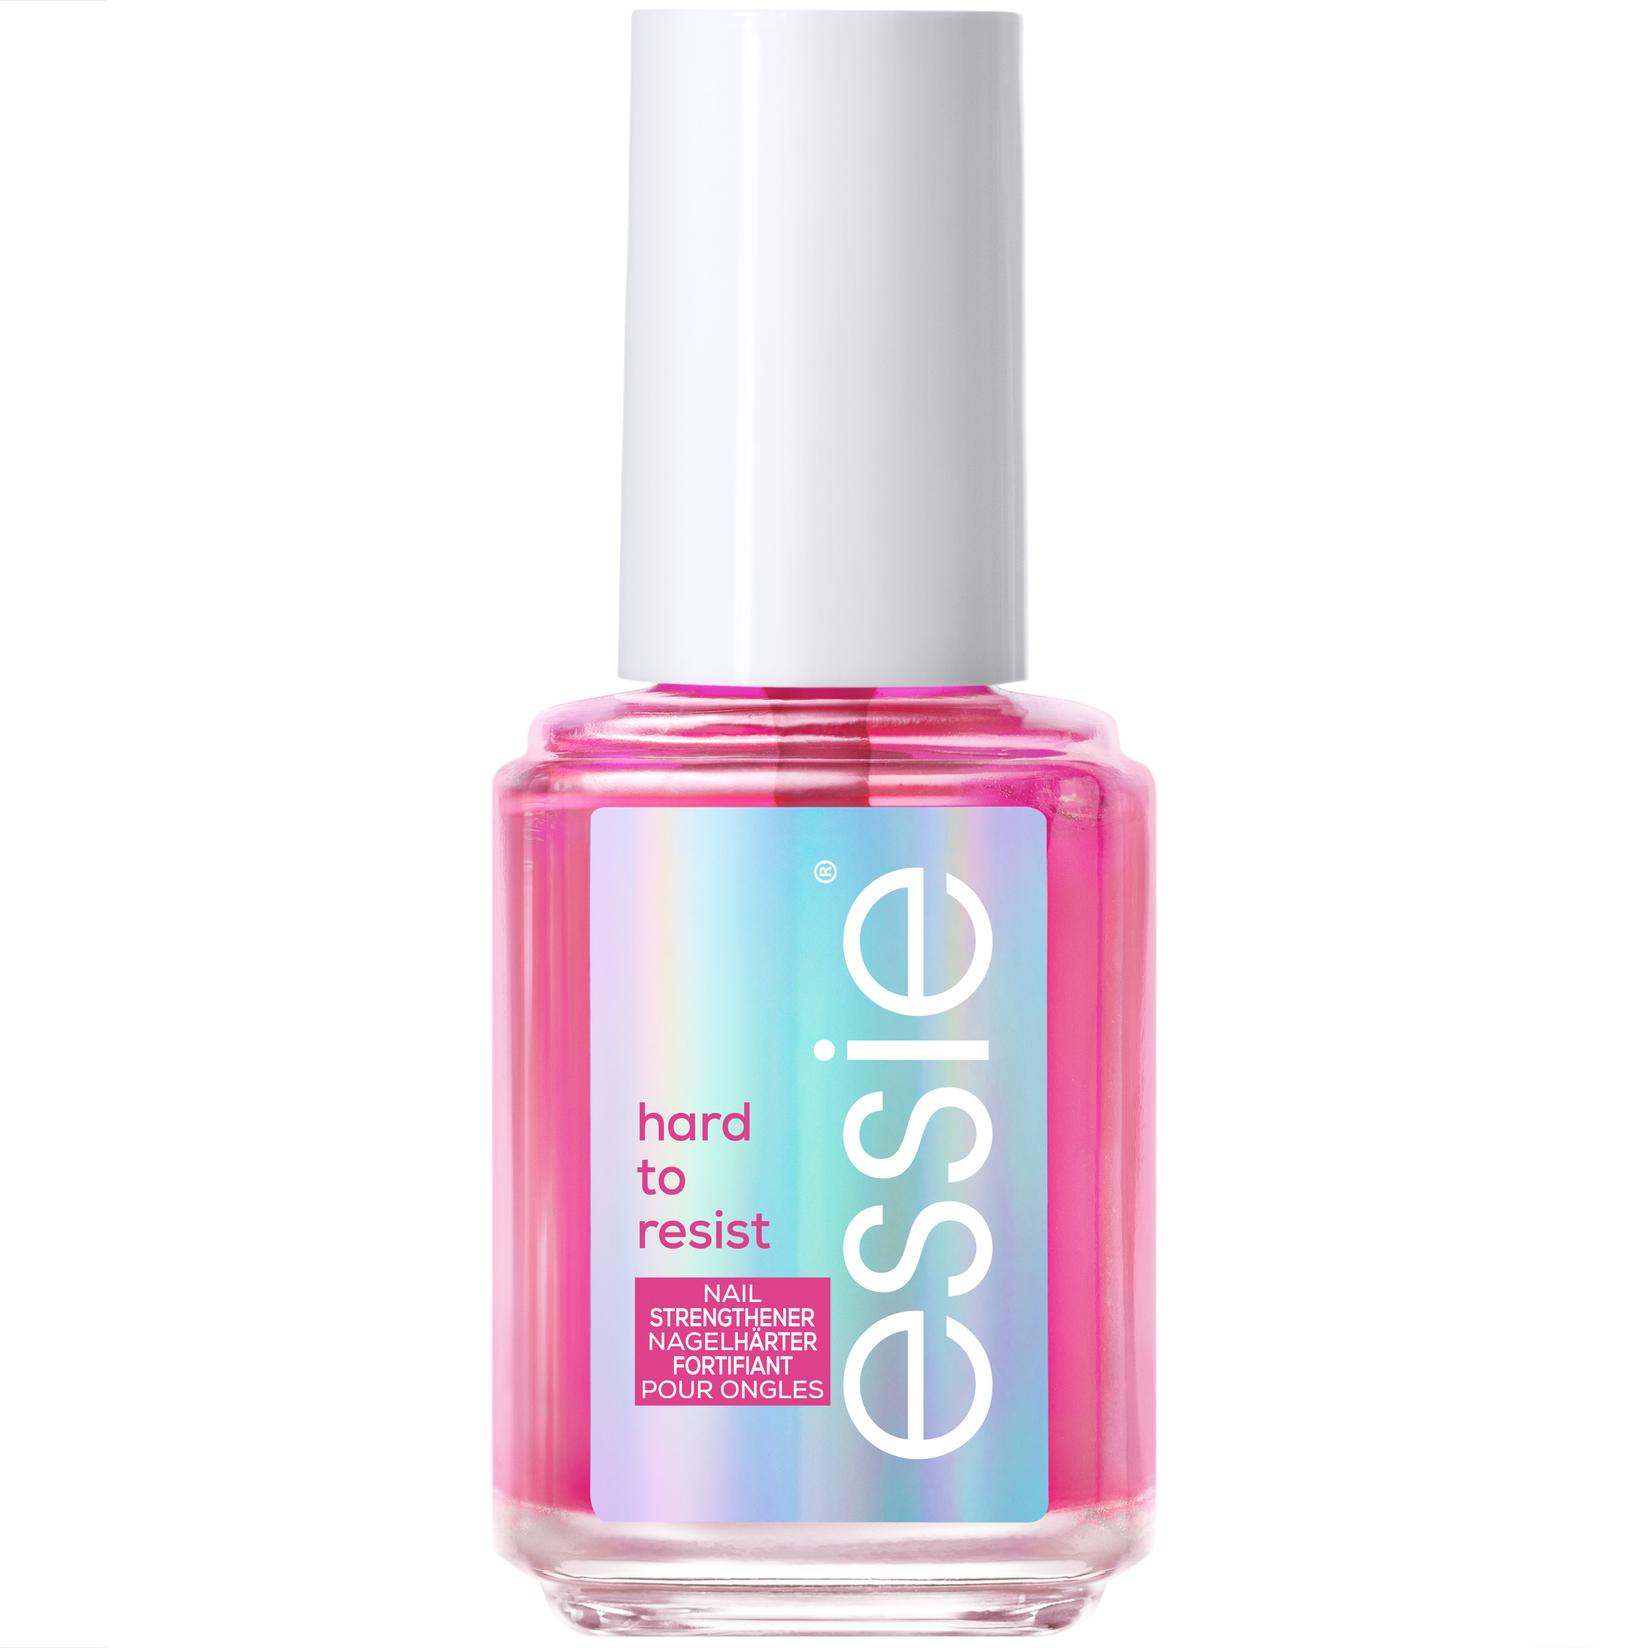 Selected image for ESSIE Lak za nokte Hard To Resist Pink